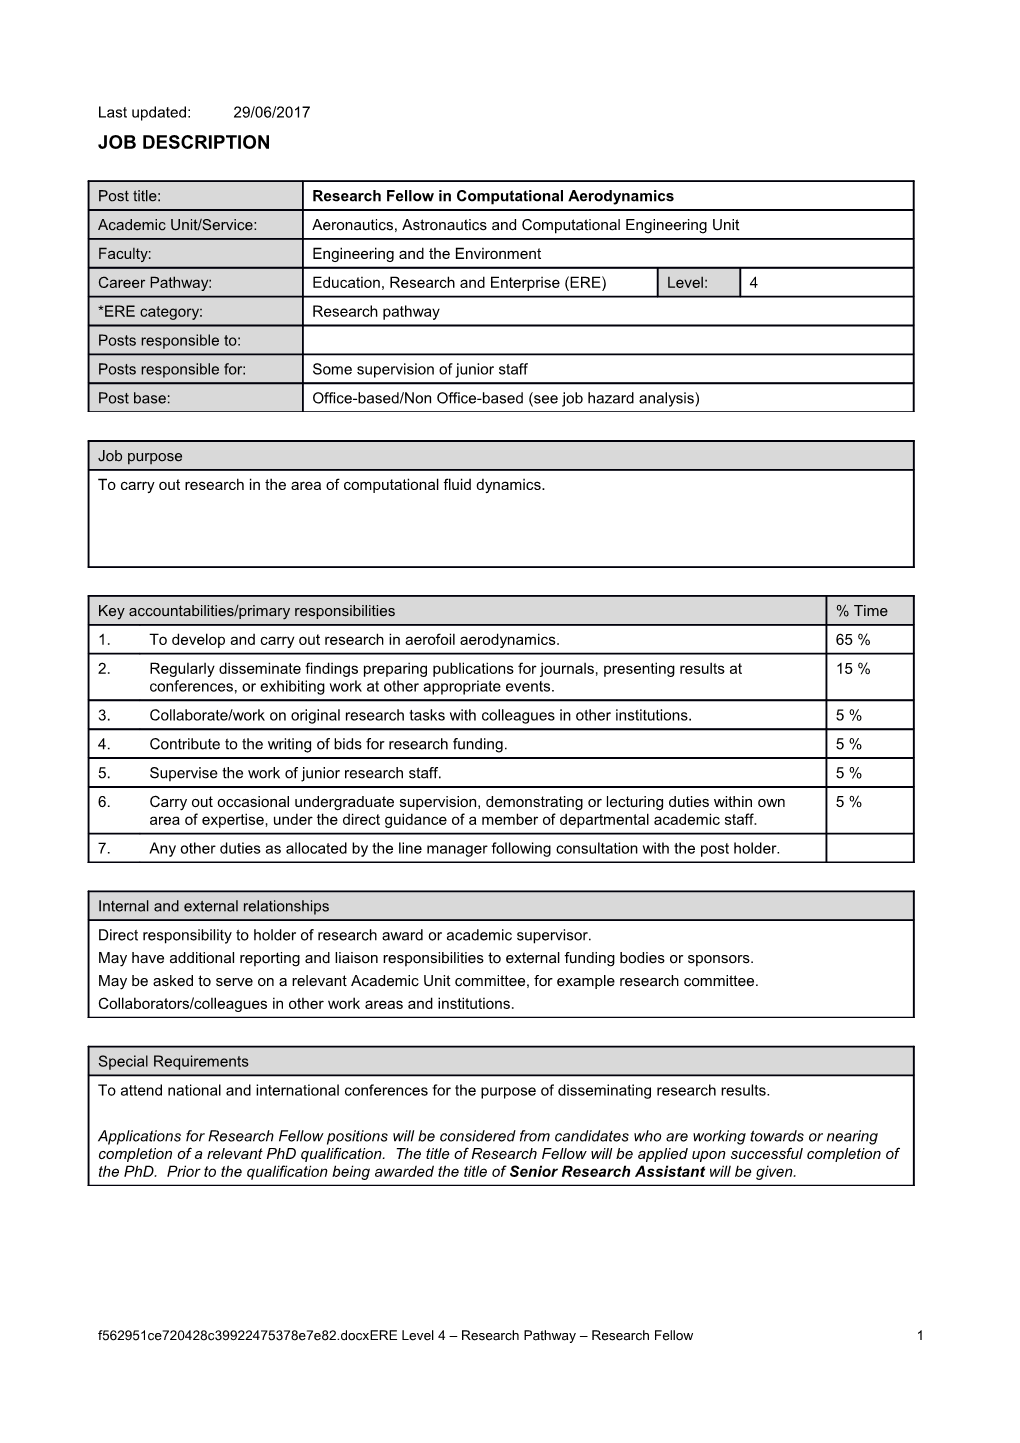 Person Specification s20